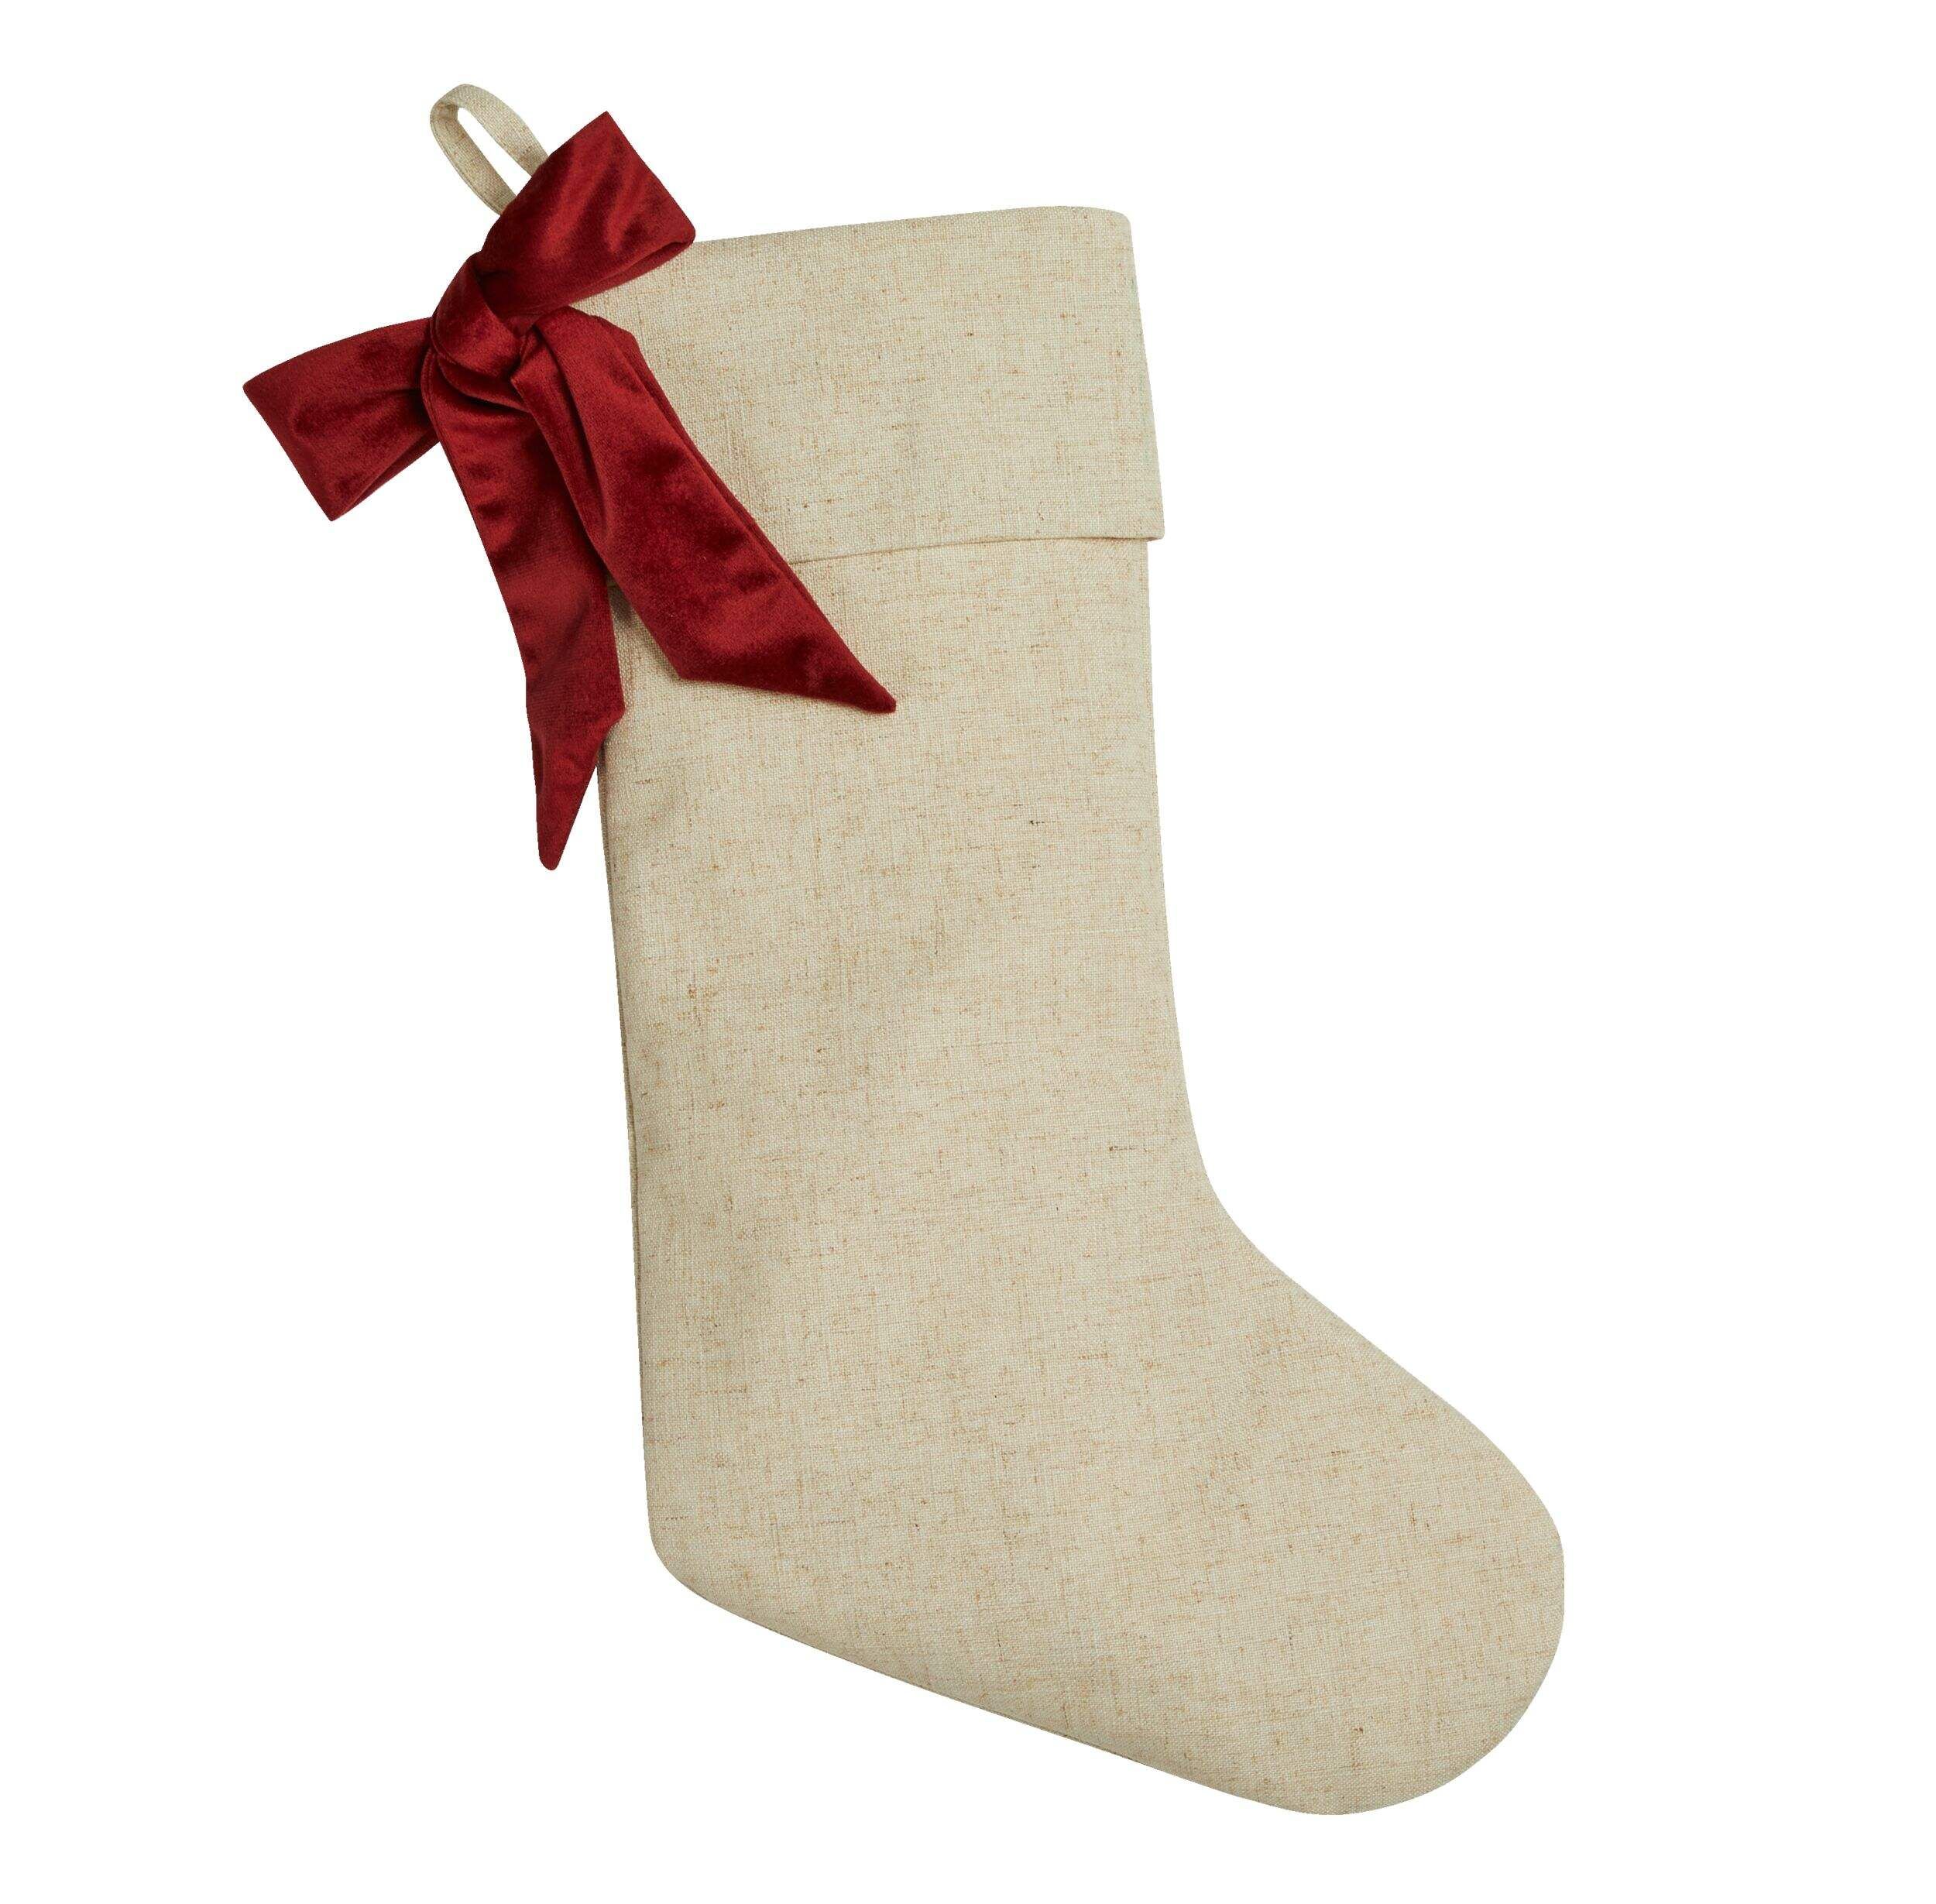 CANVAS Winter Garden Christmas Decoration Linen with Removal Bow Stocking, 18.5-in | Canadian Tire